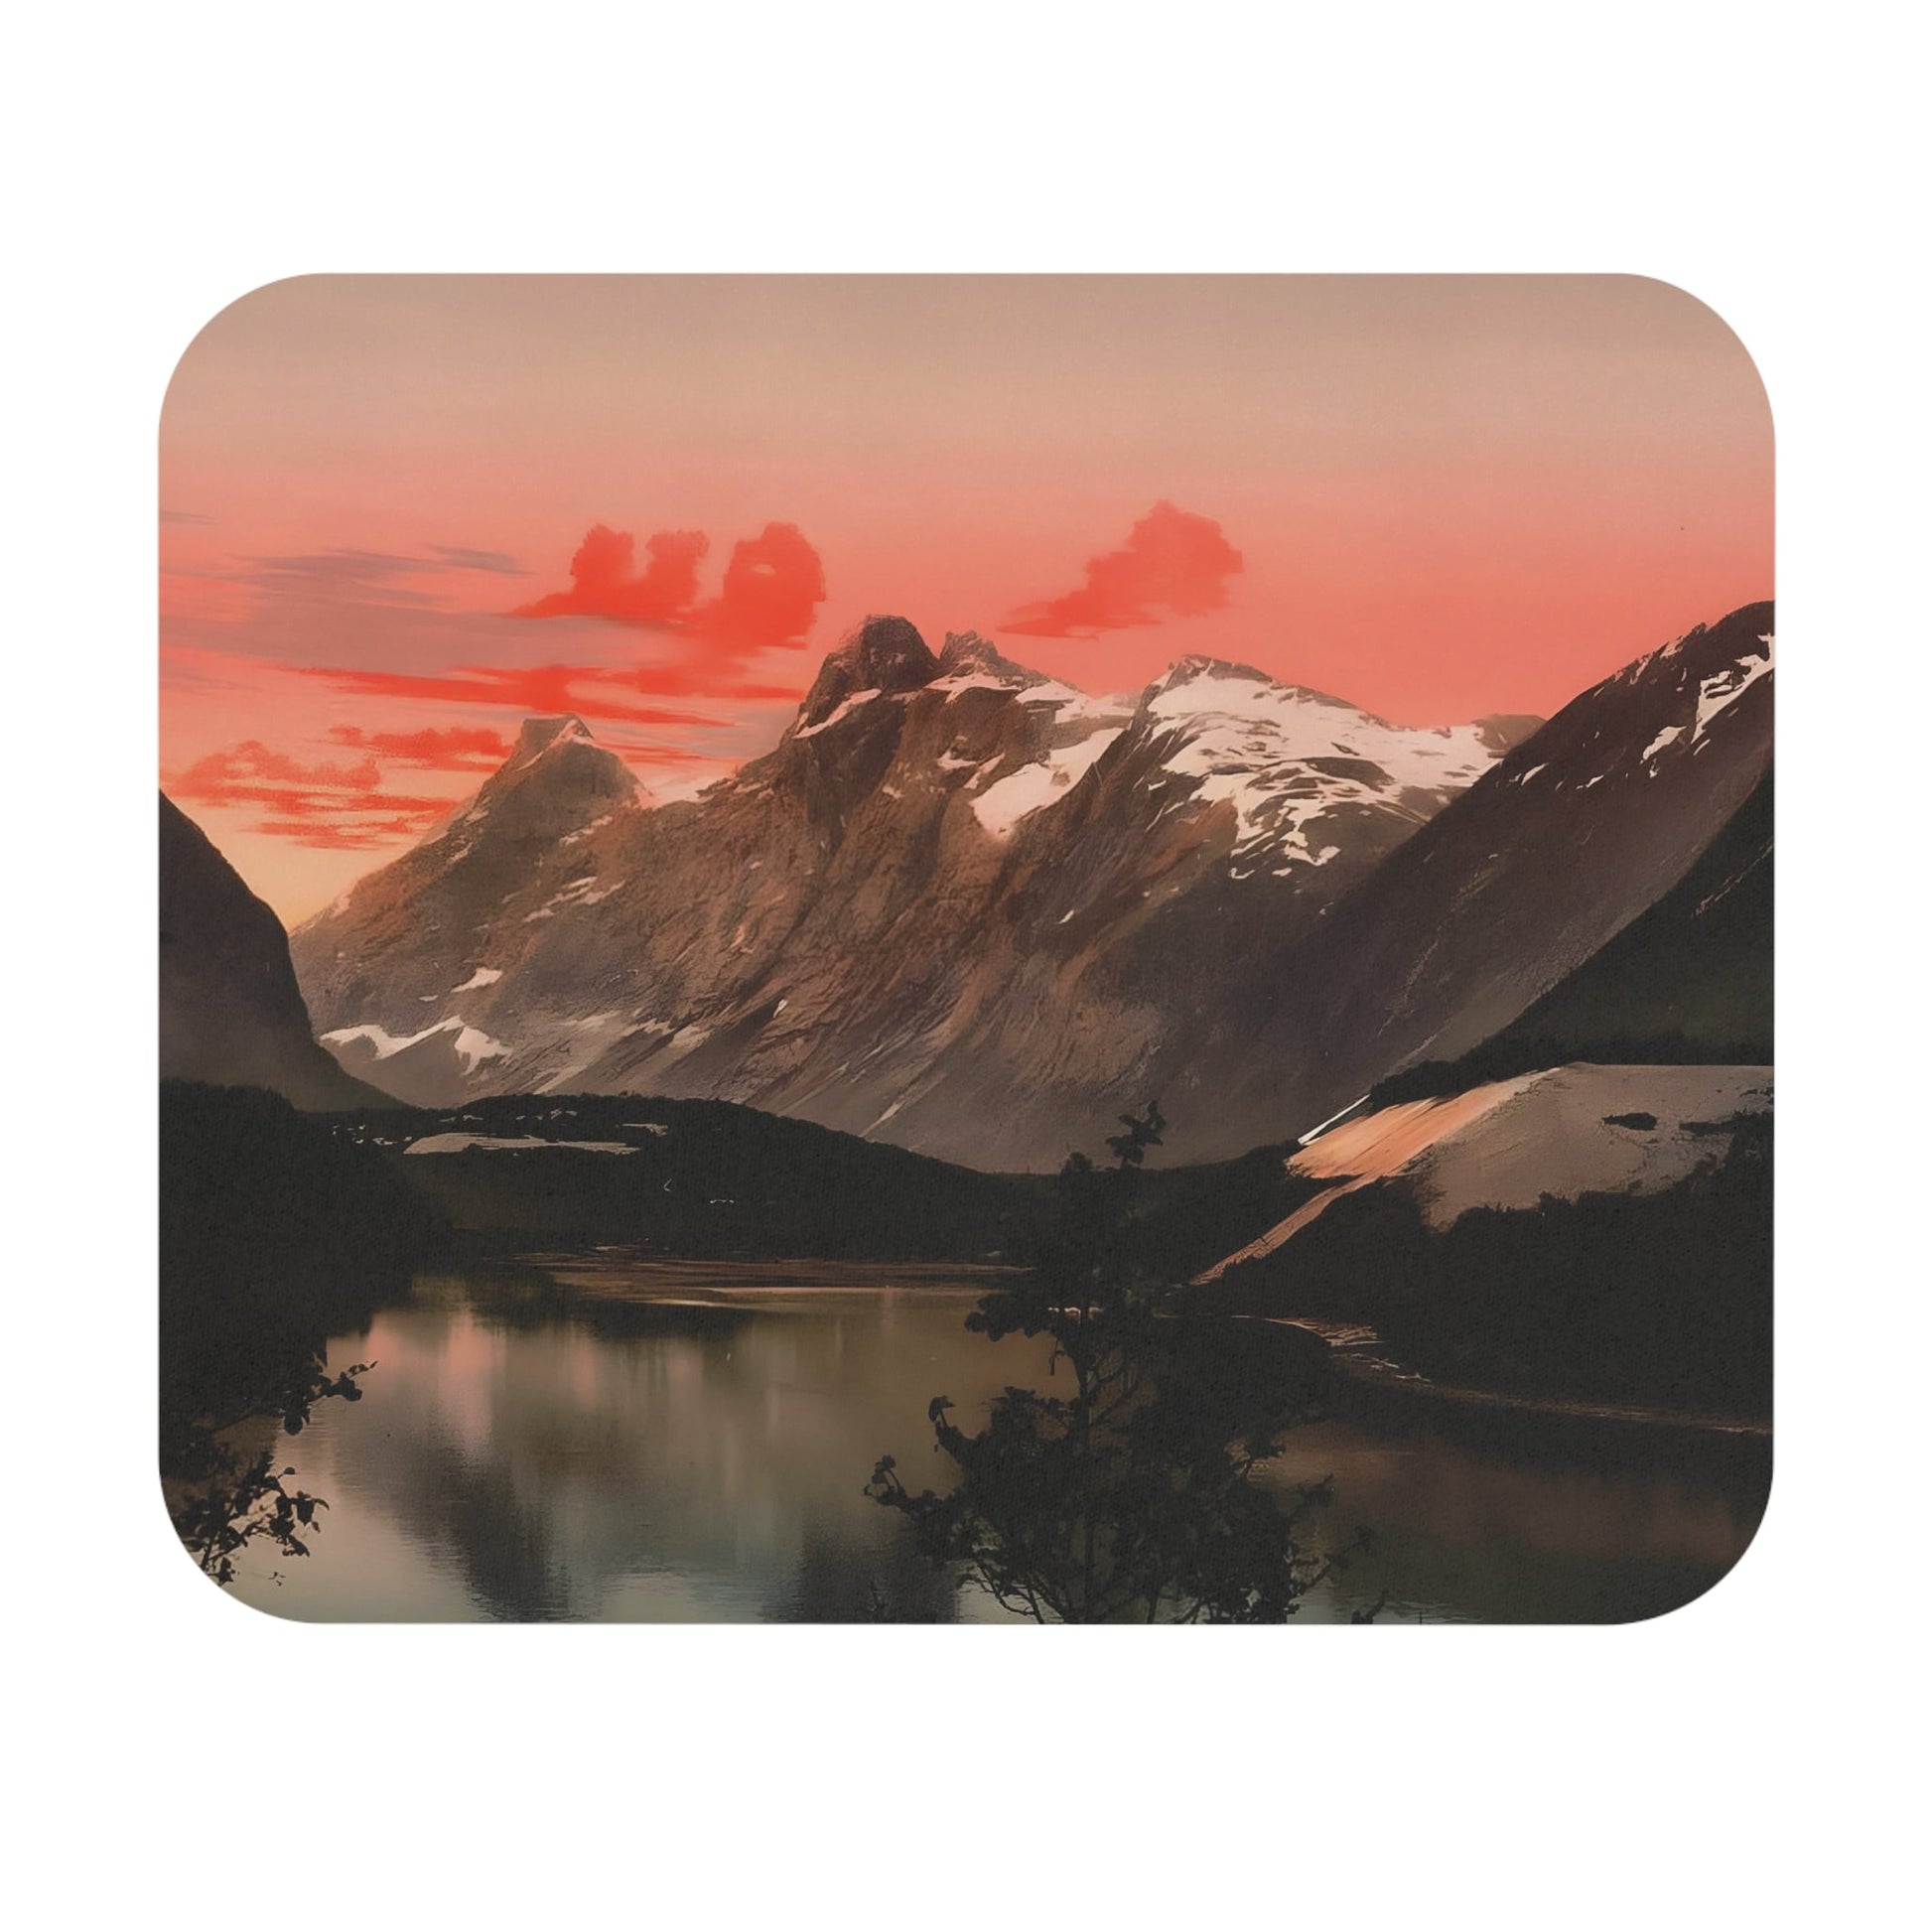 Red Mountain Sunset Mouse Pad showcasing landscapes design, perfect for desk and office decor.